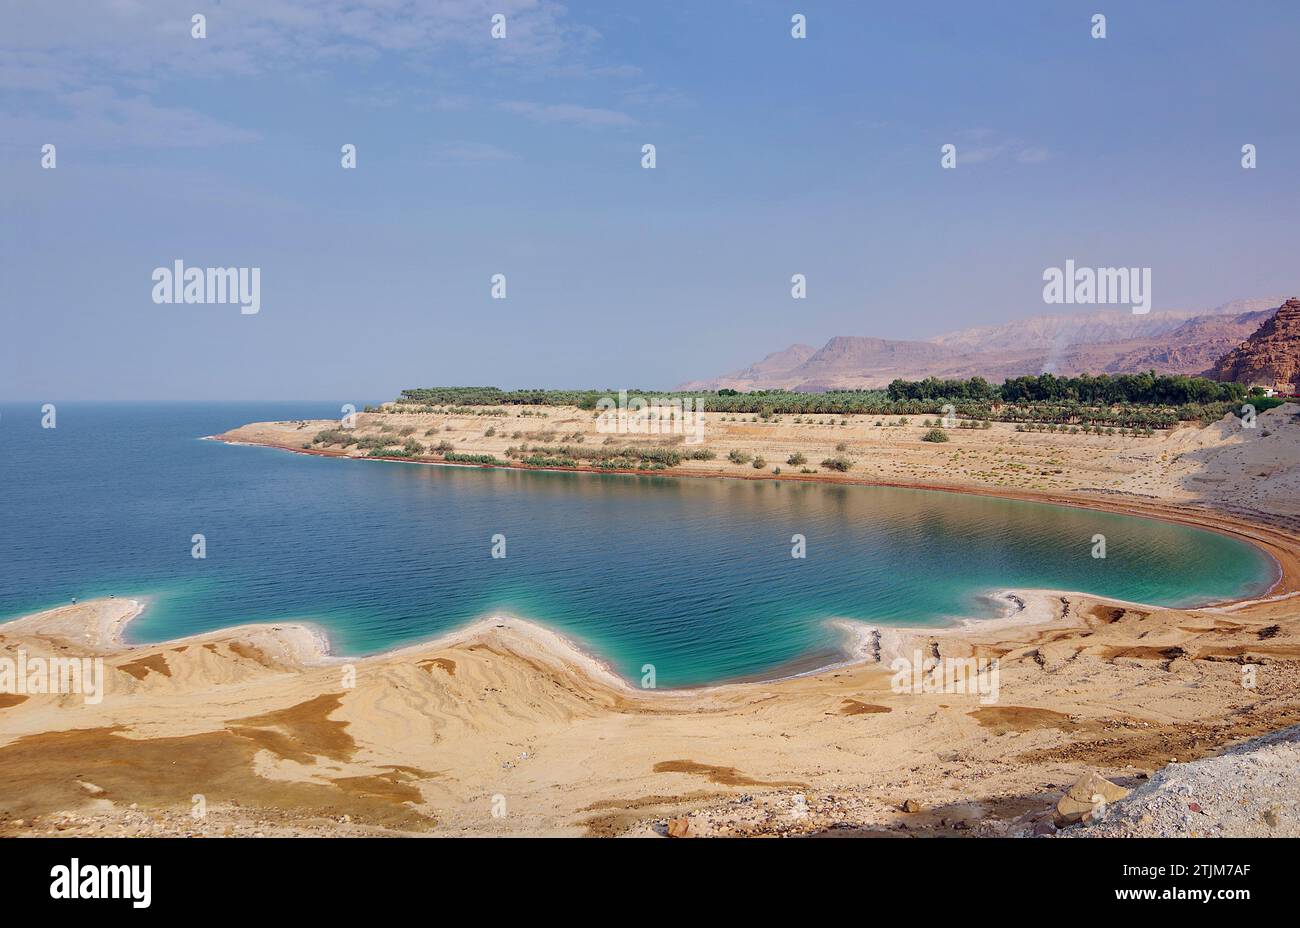 The Dead Sea (Arabic: اَلْبَحْرُ الْمَيْتُ, Āl-Baḥrū l-Maytū; Hebrew: יַם הַמֶּלַח, Yam hamMelaḥ), also known by other names, is a salt lake bordered by Jordan to the east and Palestine's West Bank and Israel to the west. It lies in the Jordan Rift Valley, and its main tributary is the Jordan River.  Credit: JHelebrant Stock Photo